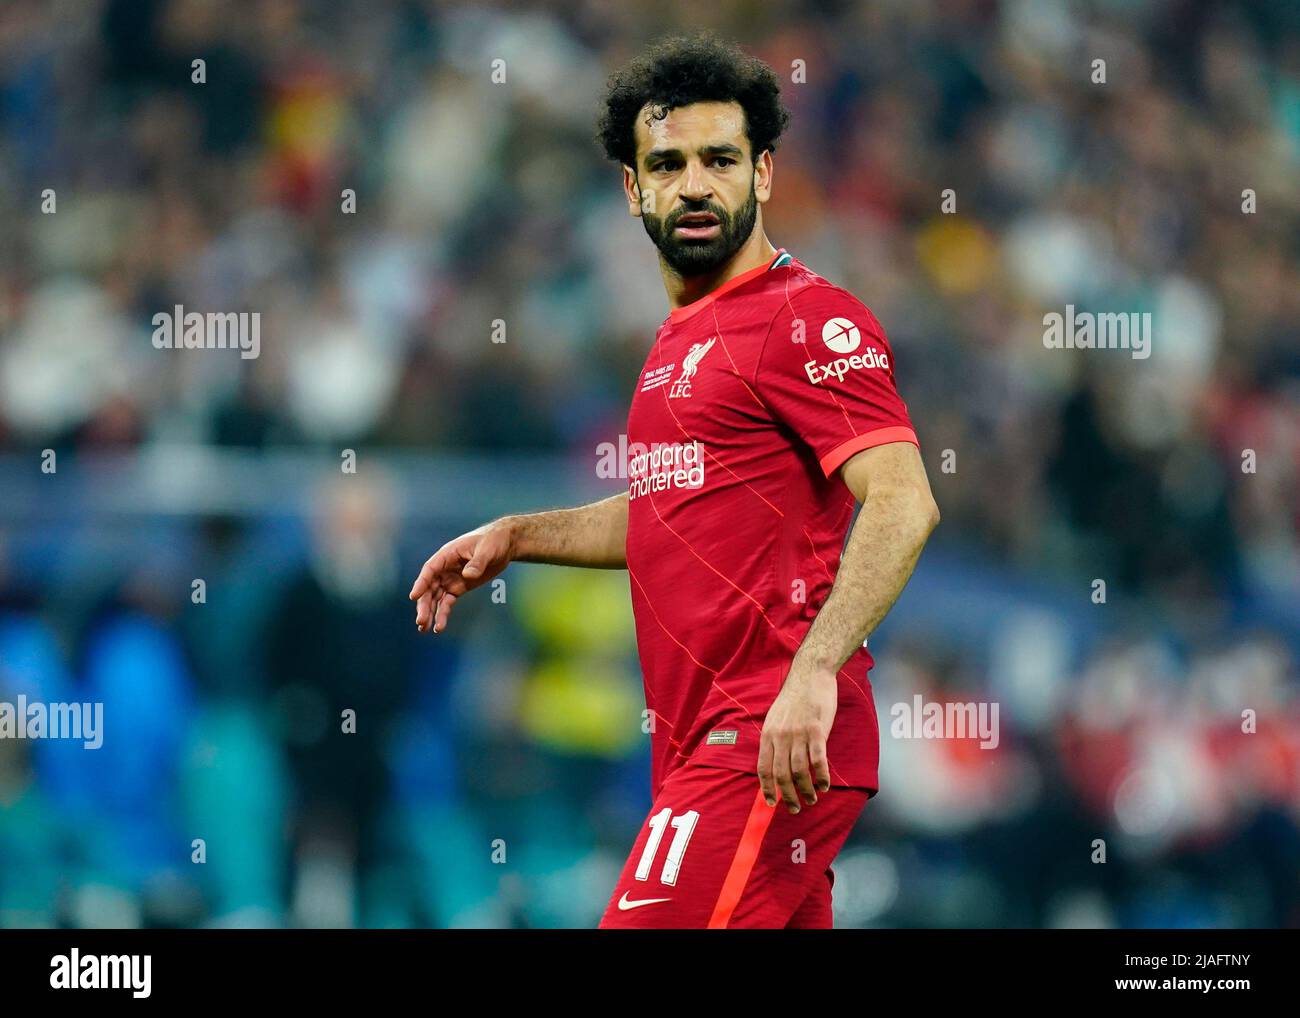 Mohamed Salah of Liverpool FC during the UEFA Champions League Final match between Liverpool FC and Real Madrid played at Stade de France on May 28, 2022 in Paris, France. (Photo / Magma) Stock Photo